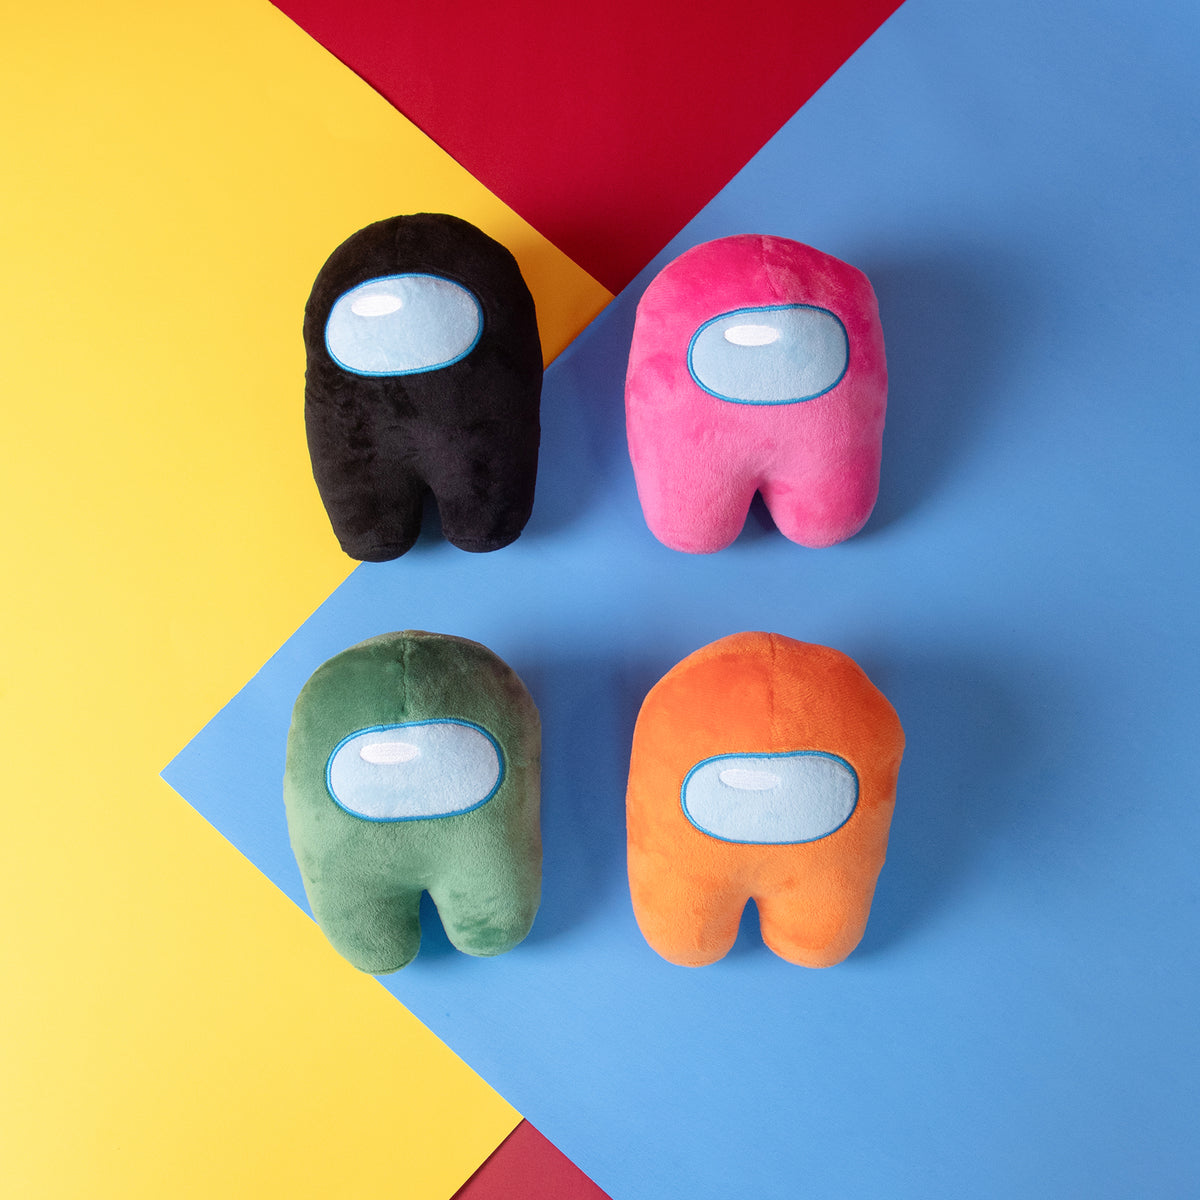 Lifestyle Photograph of a Black, Green, Orange, and Pink Crewmate Plush by Frisk Wolfie stacked in two rows of two against a yellow, red, blue color blocked background.